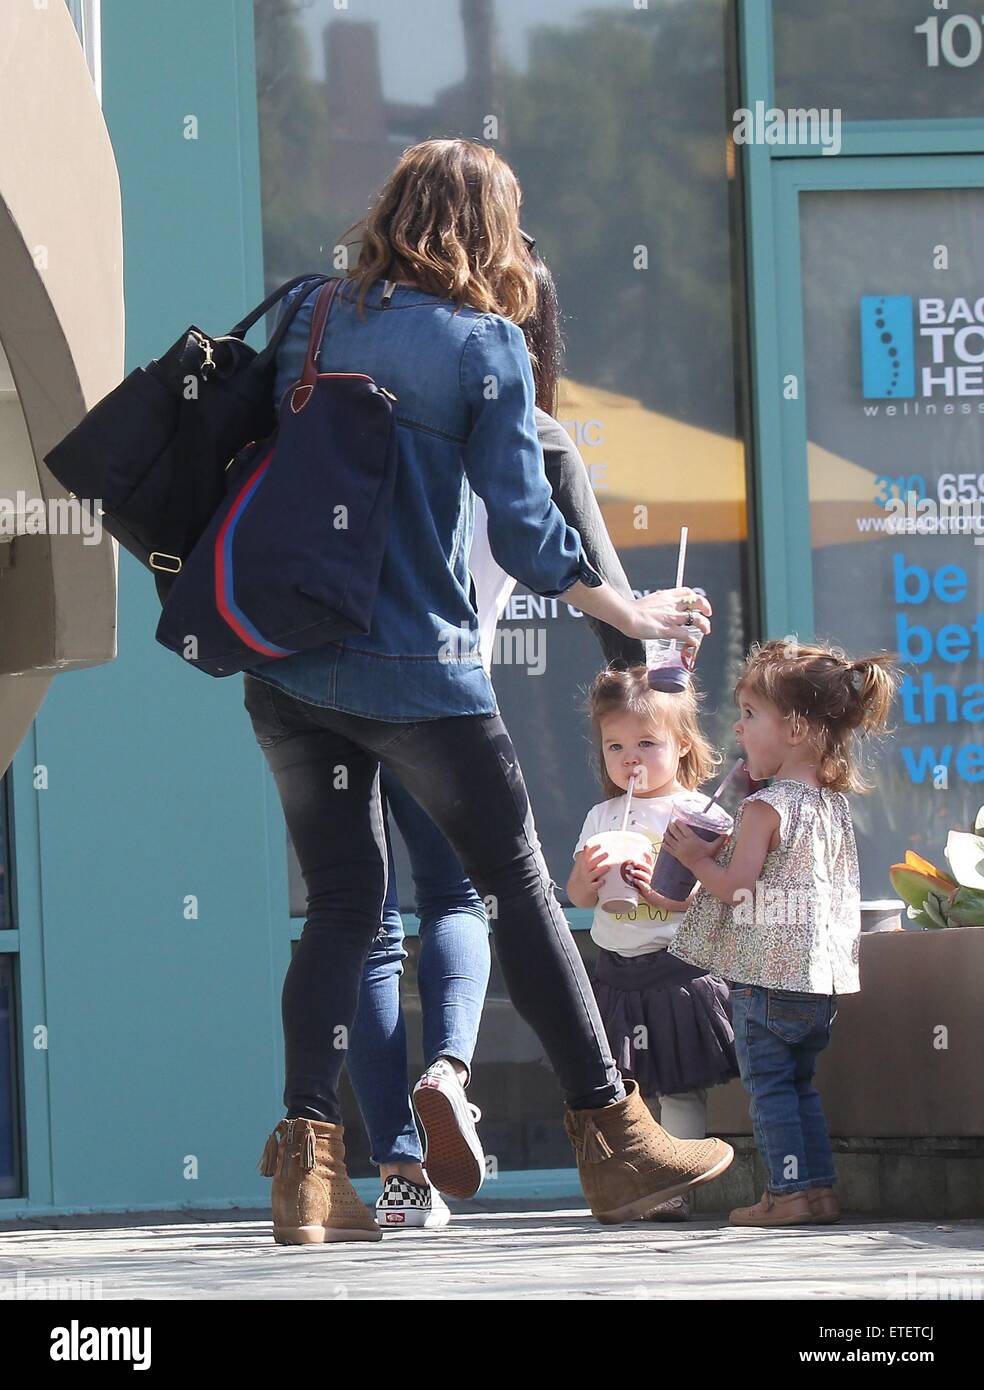 Jenna Dewan, wife of Channing Tatum, enjoys a smoothie from Earthbar with her daughter Everly Tatum  Featuring: Jenna Dewan, Everly Tatum Where: Los Angeles, California, United States When: 06 Feb 2015 Credit: WENN.com Stock Photo